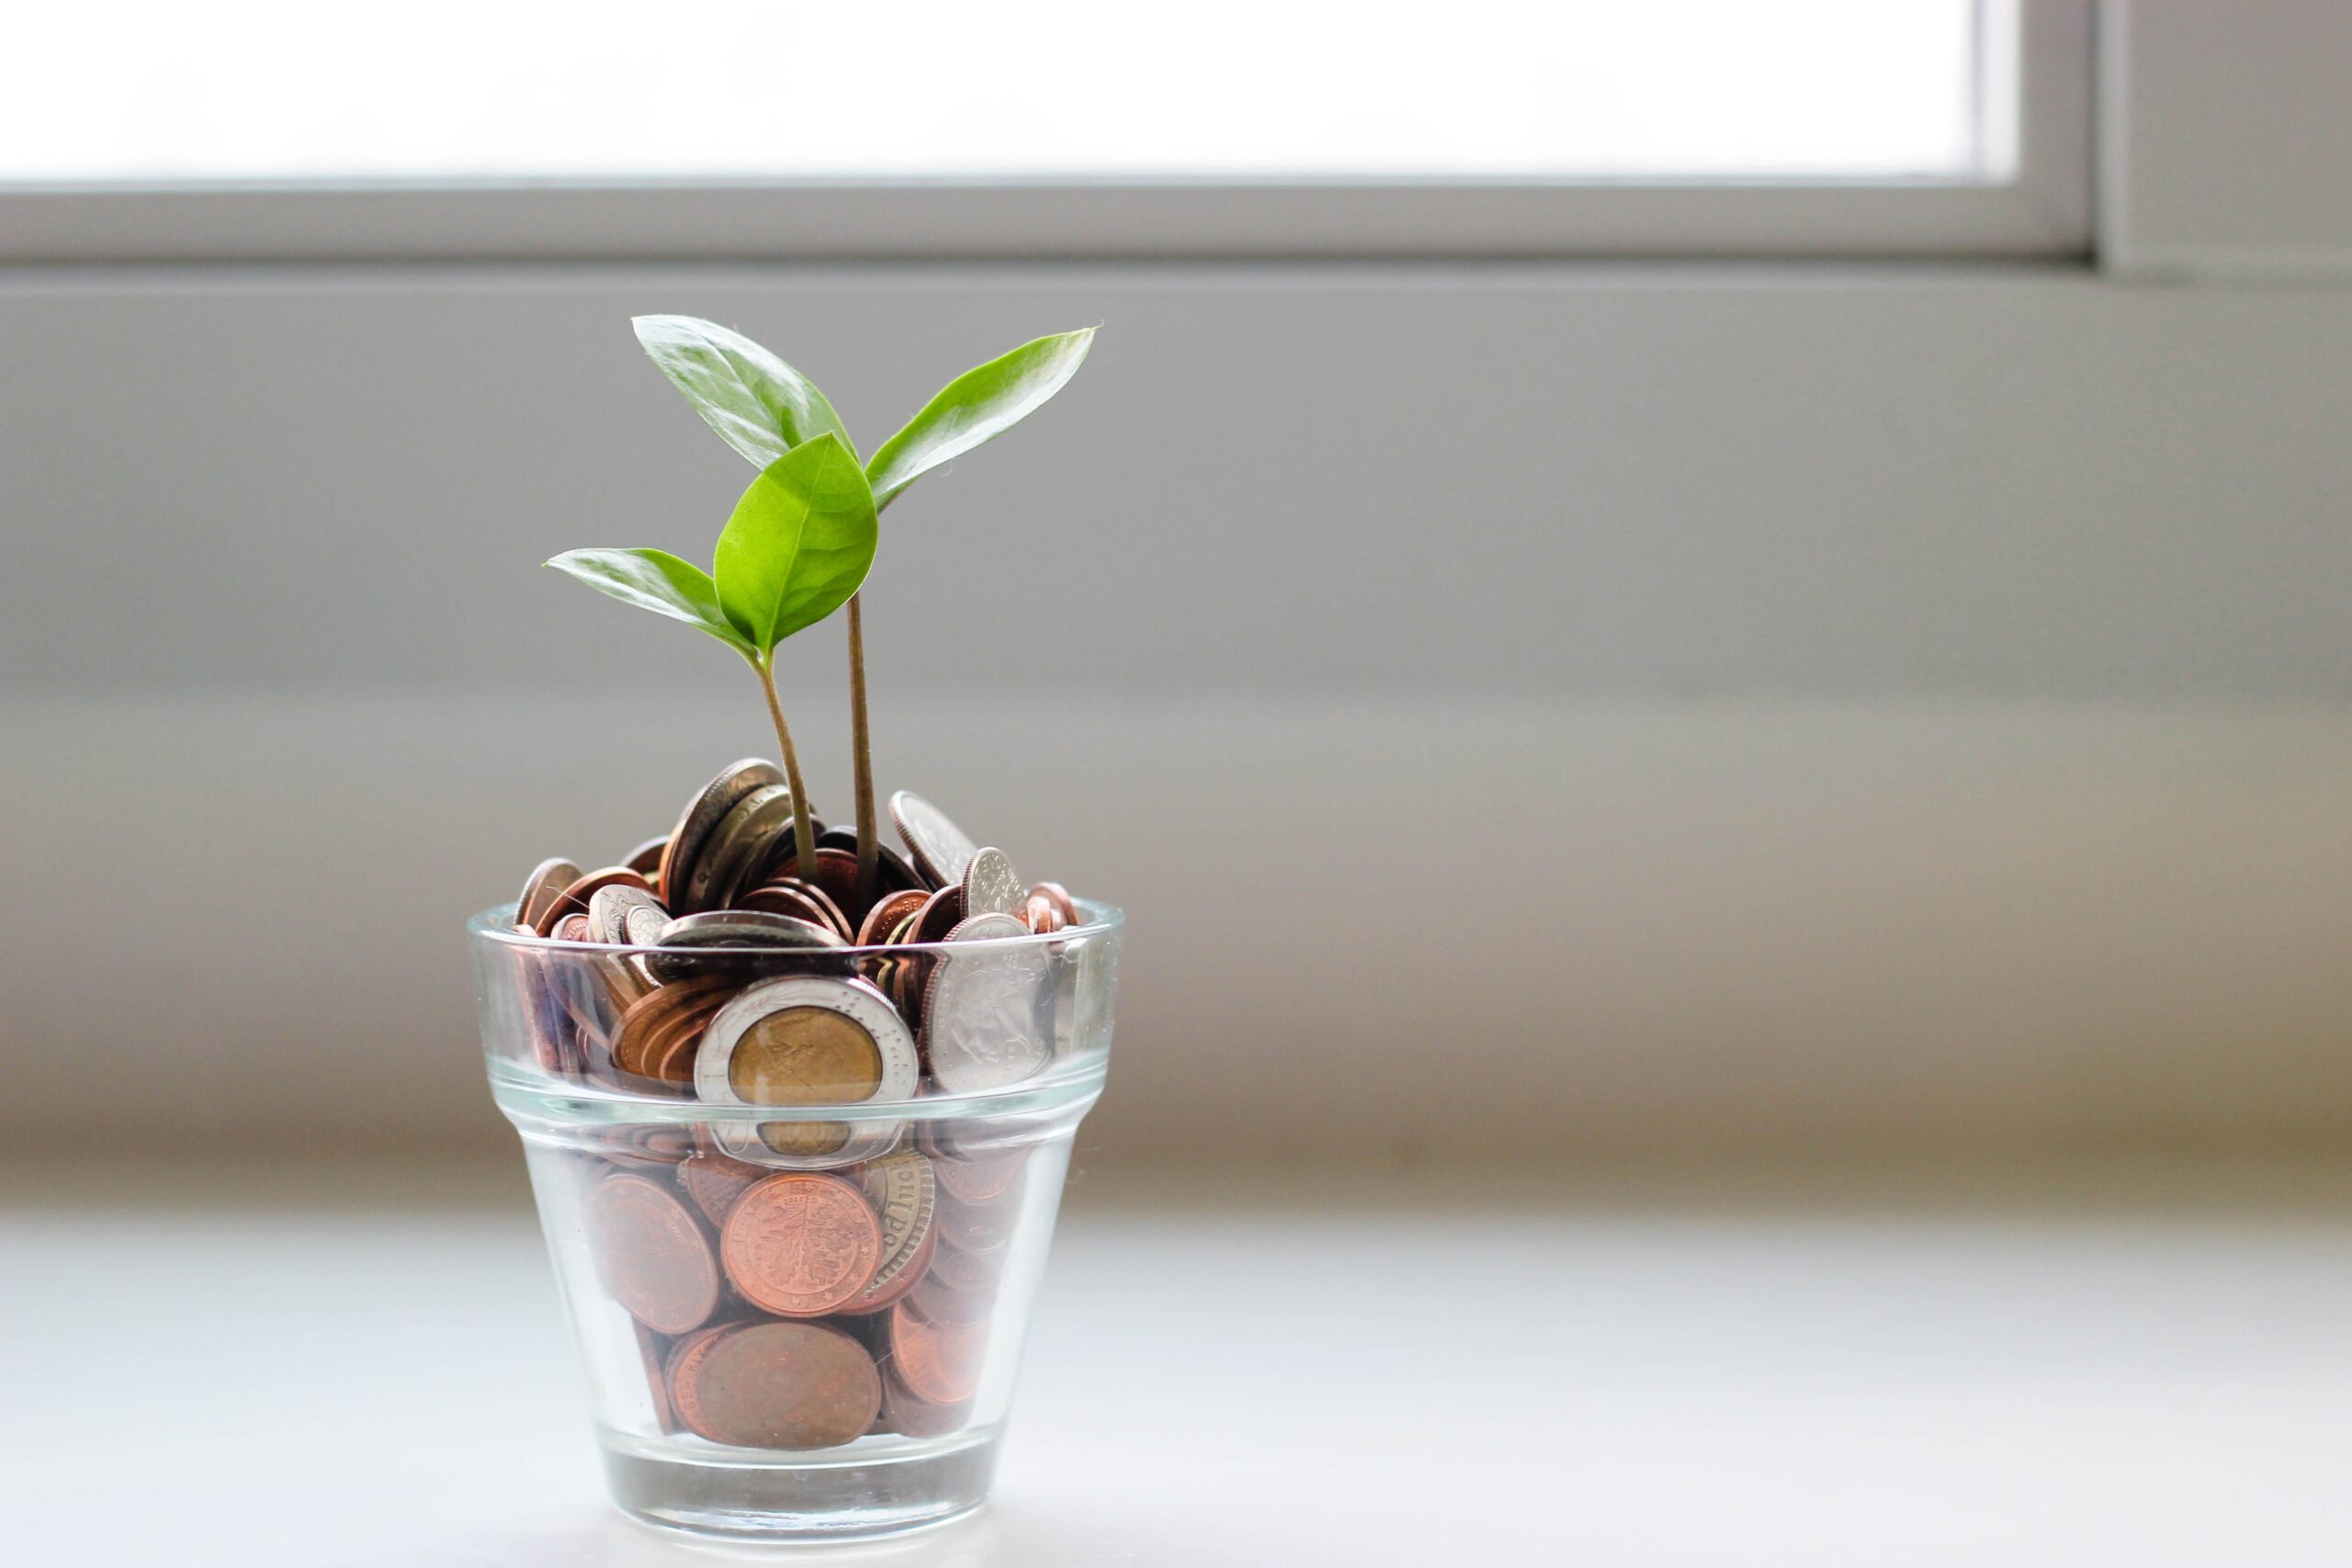 shot glass filled with coins and plant growing out the top